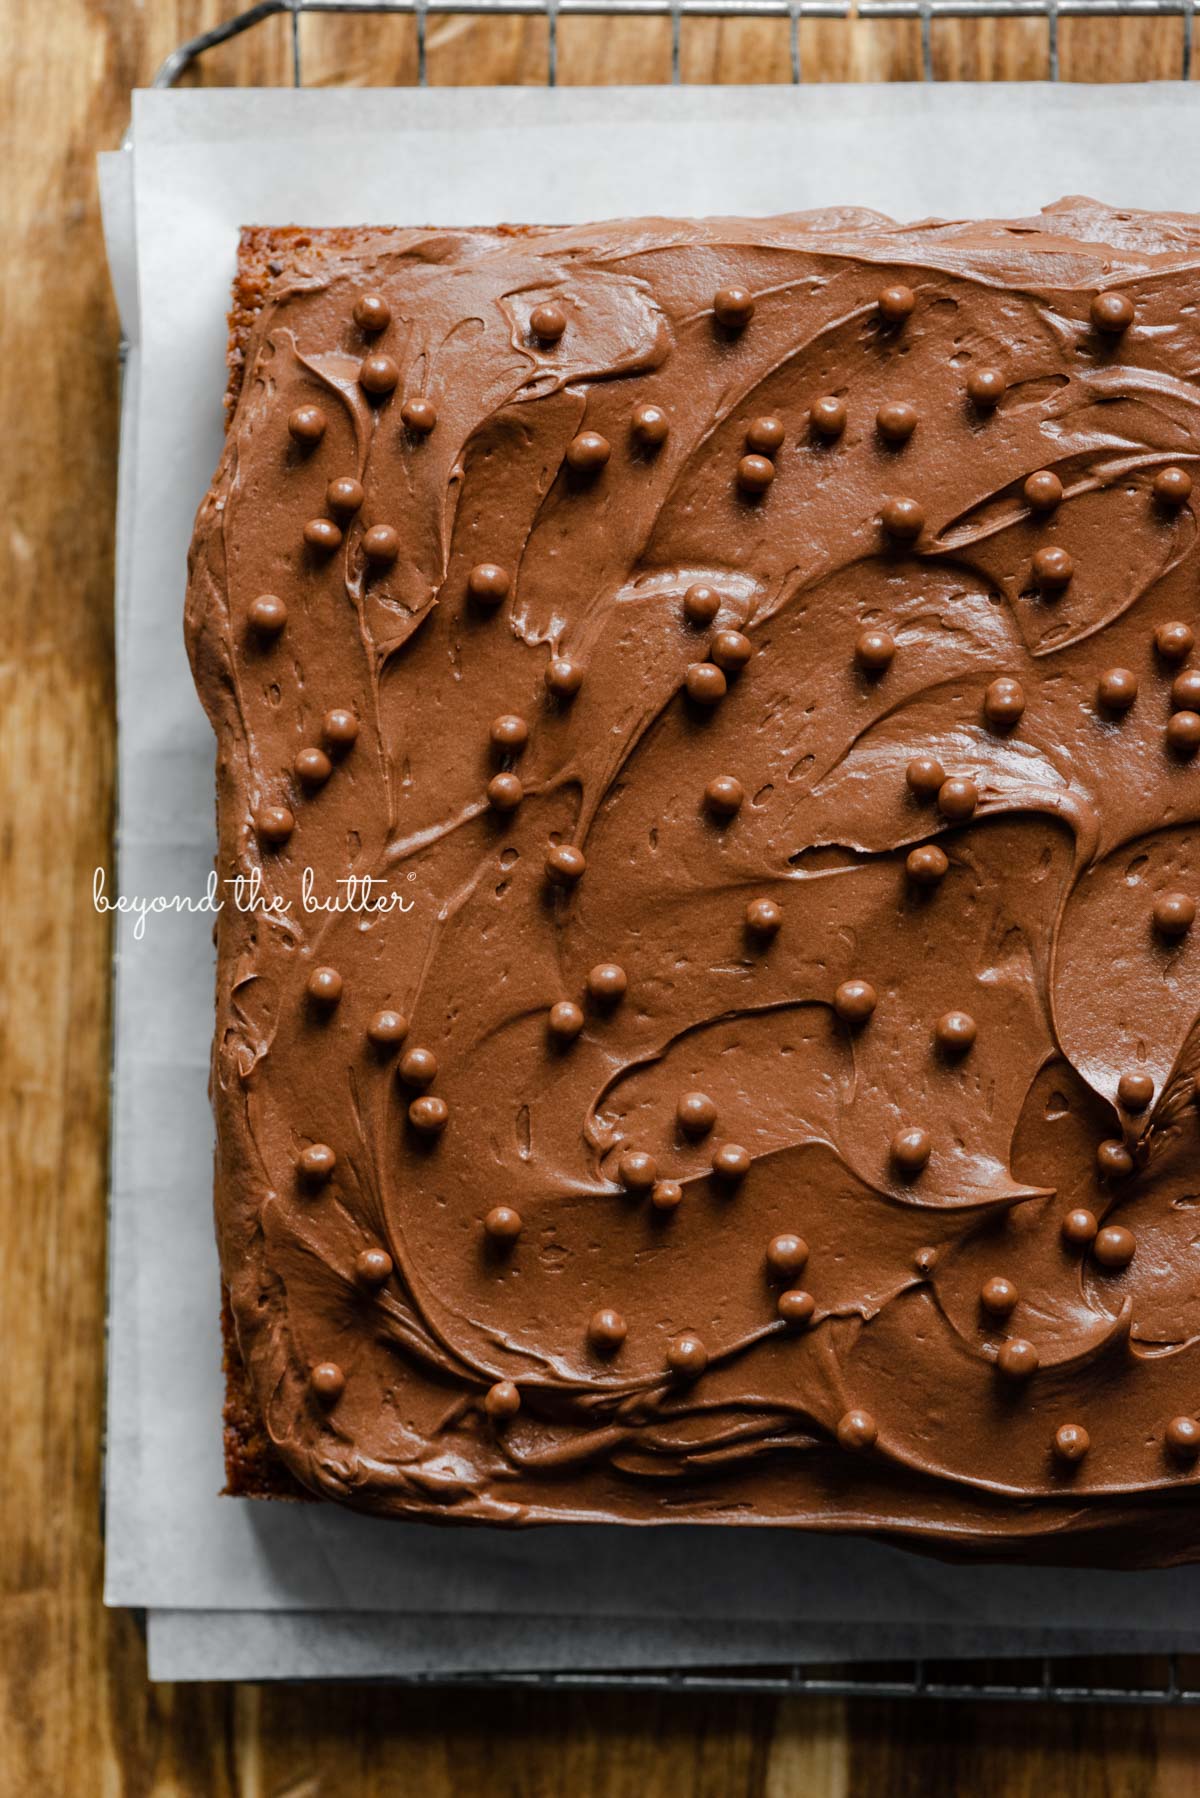 Banana chocolate chip snack cake with chocolate cream cheese frosting on parchment paper and wire cooling rack | All images © Beyond the Butter®